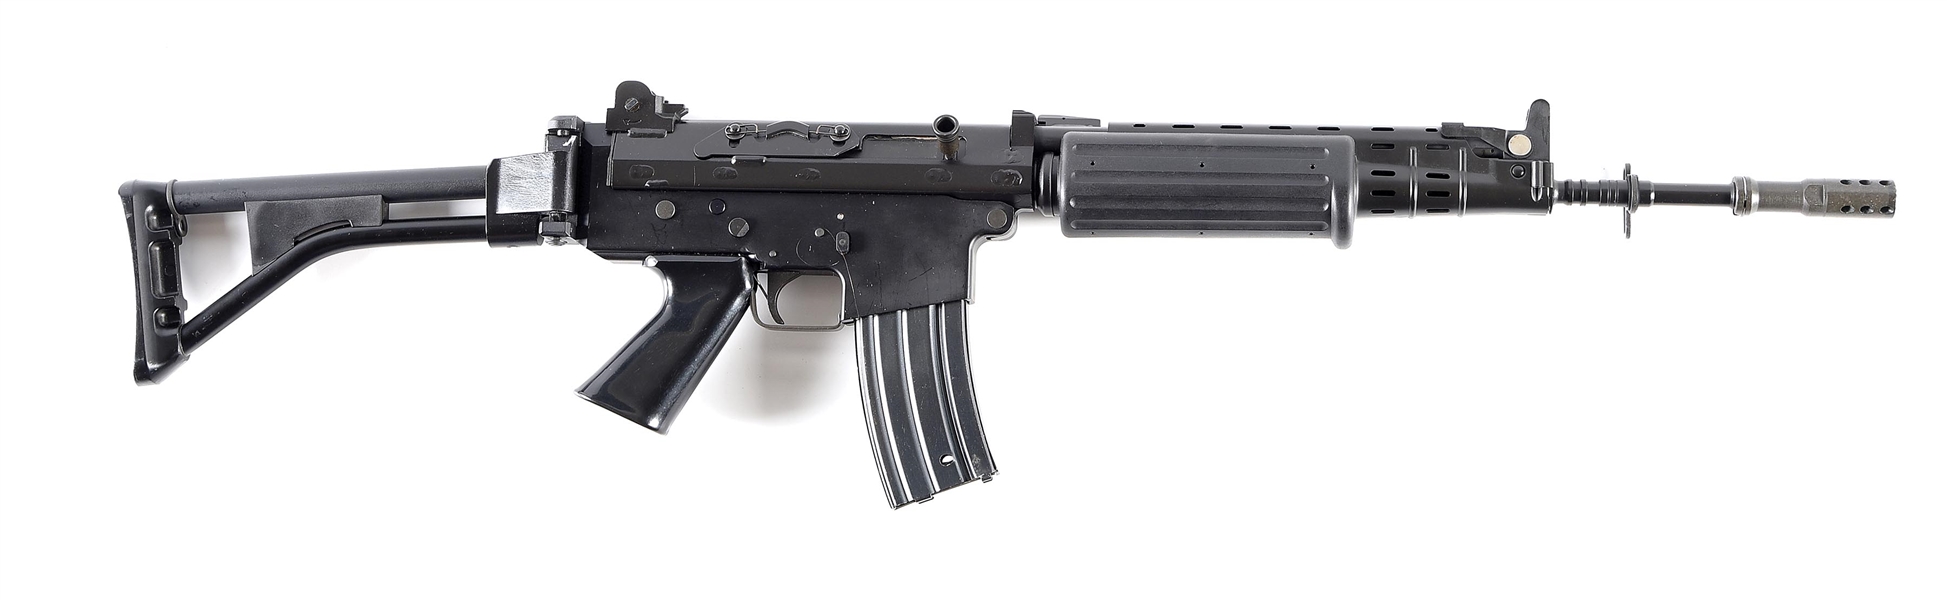 (N) FABRIQUE NATIONALE FNC HOST GUN WITH S&H ARMS AUTO SEAR MACHINE GUN (FULLY TRANSFERABLE).